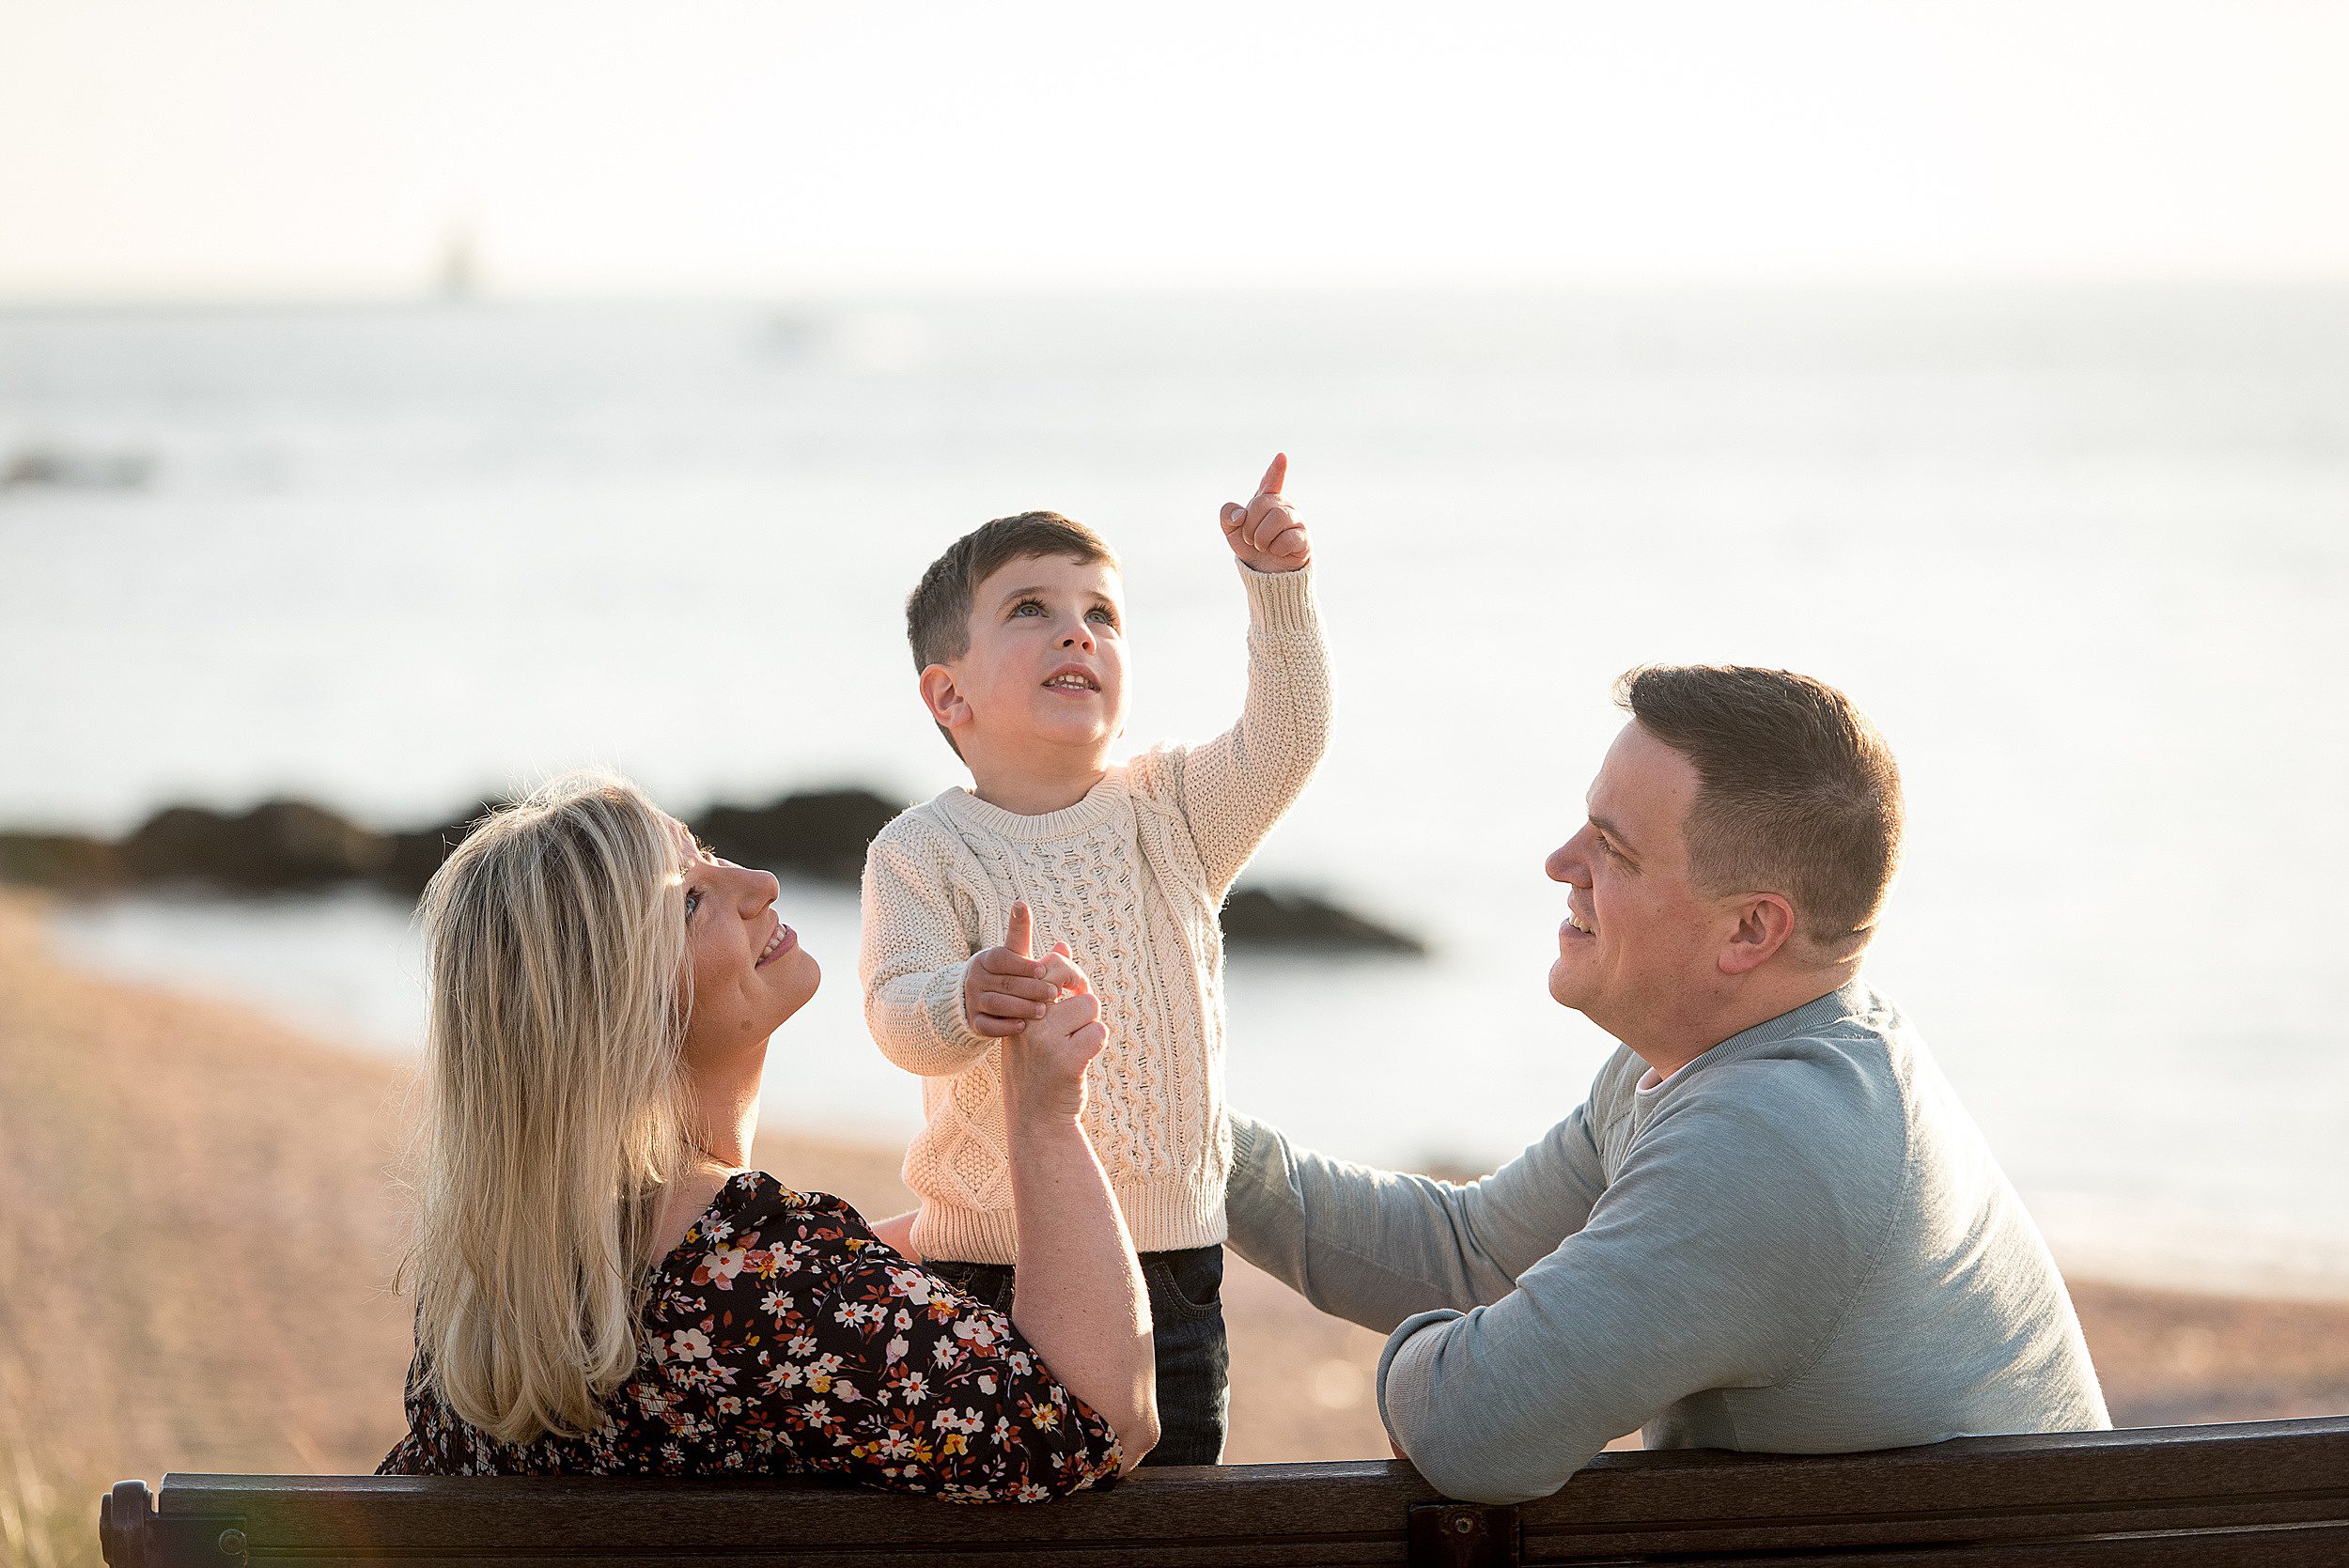 Mom and dad sit on a bench at the beach while playing with their toddler son in a white sweater new haven photographer